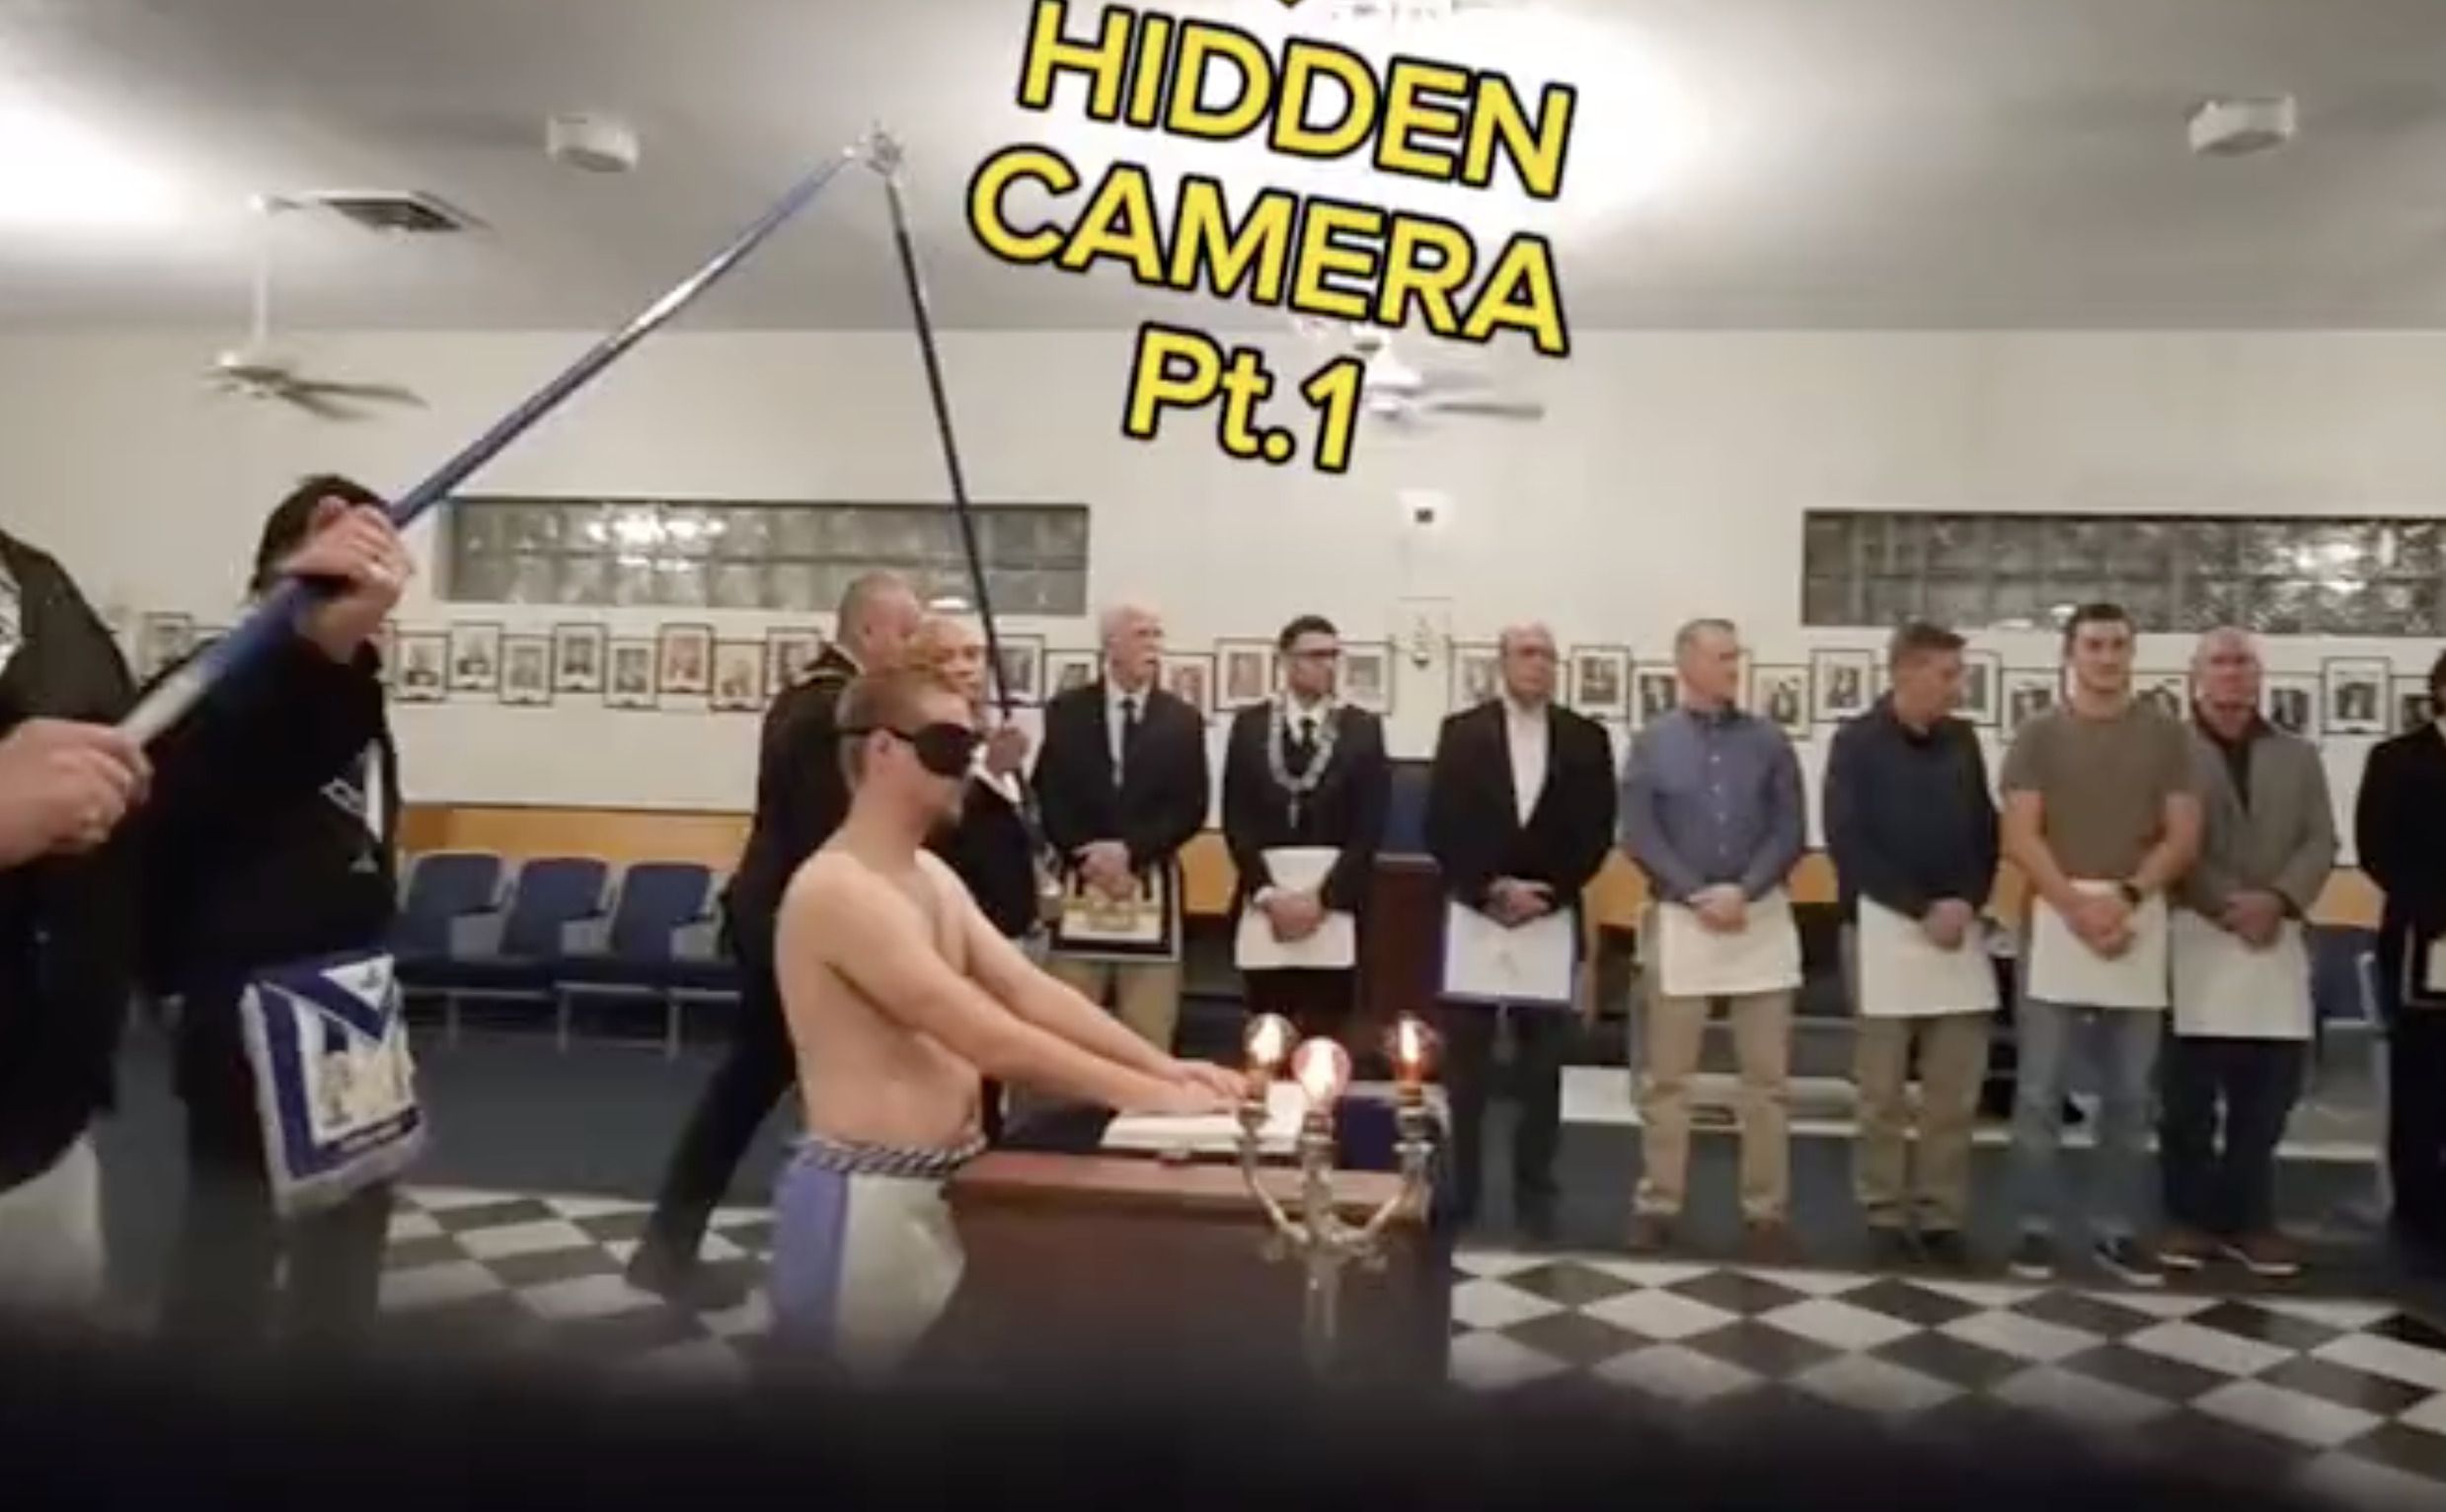 Independent Journalist Infiltrates FREEMASON Lodge, Exposes Bizarre Rituals! | WLT Report